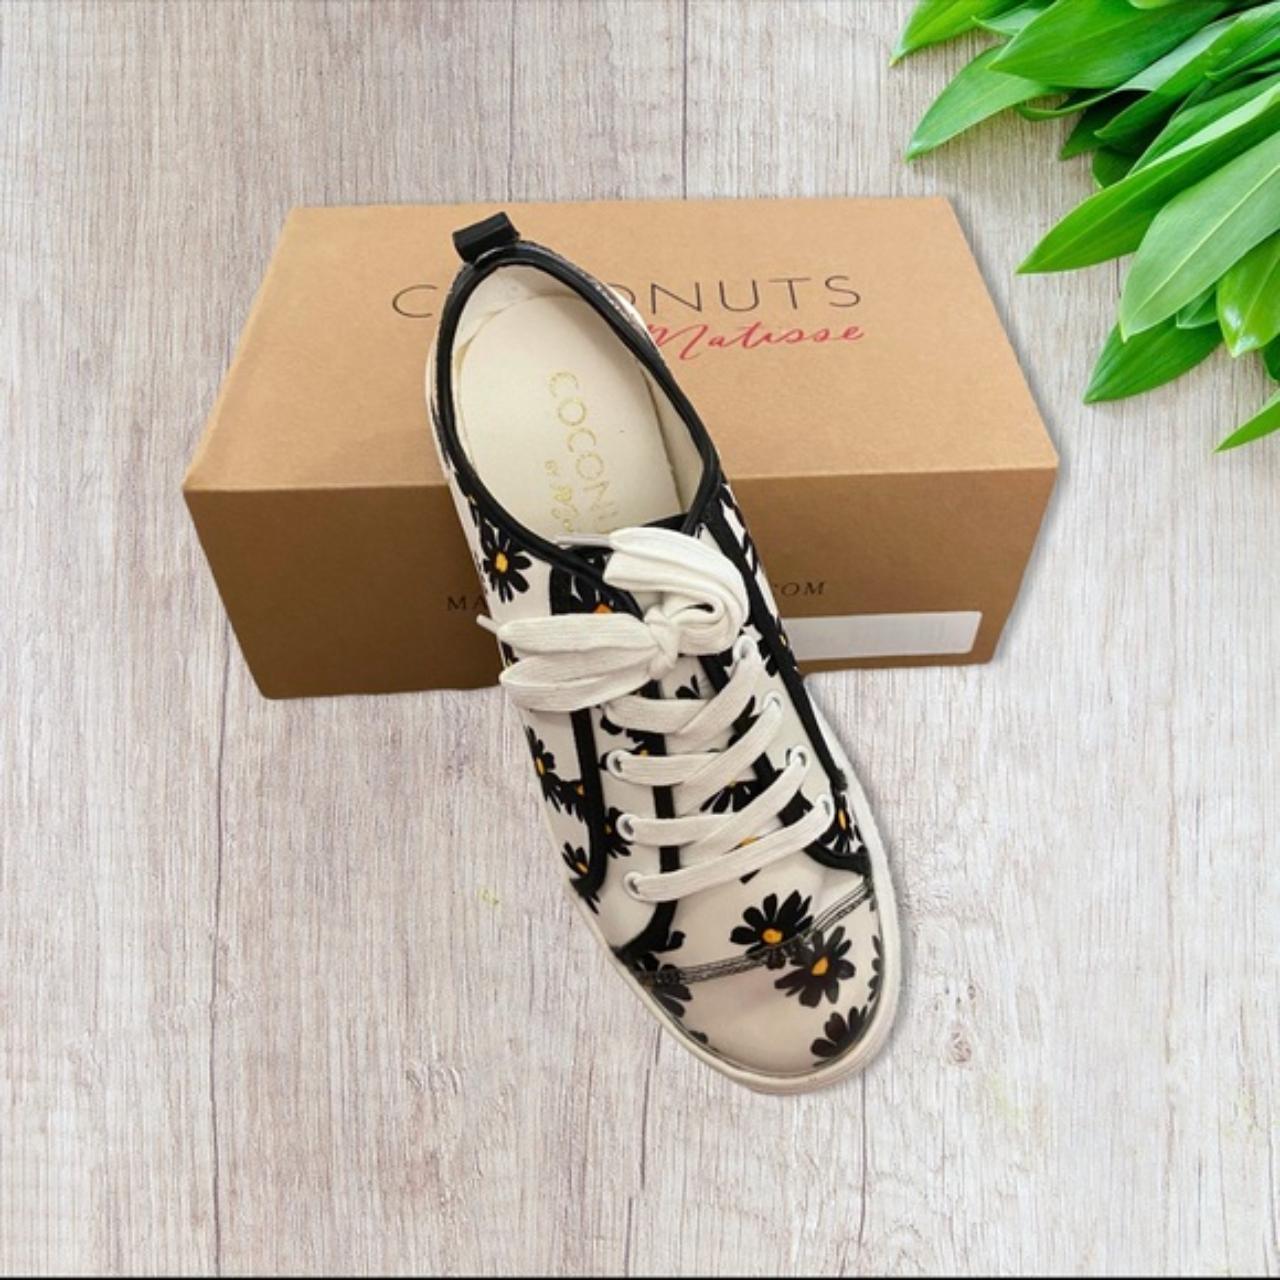 Product Image 2 - Bravo Daisy Sneakers by Matisse

Bloom